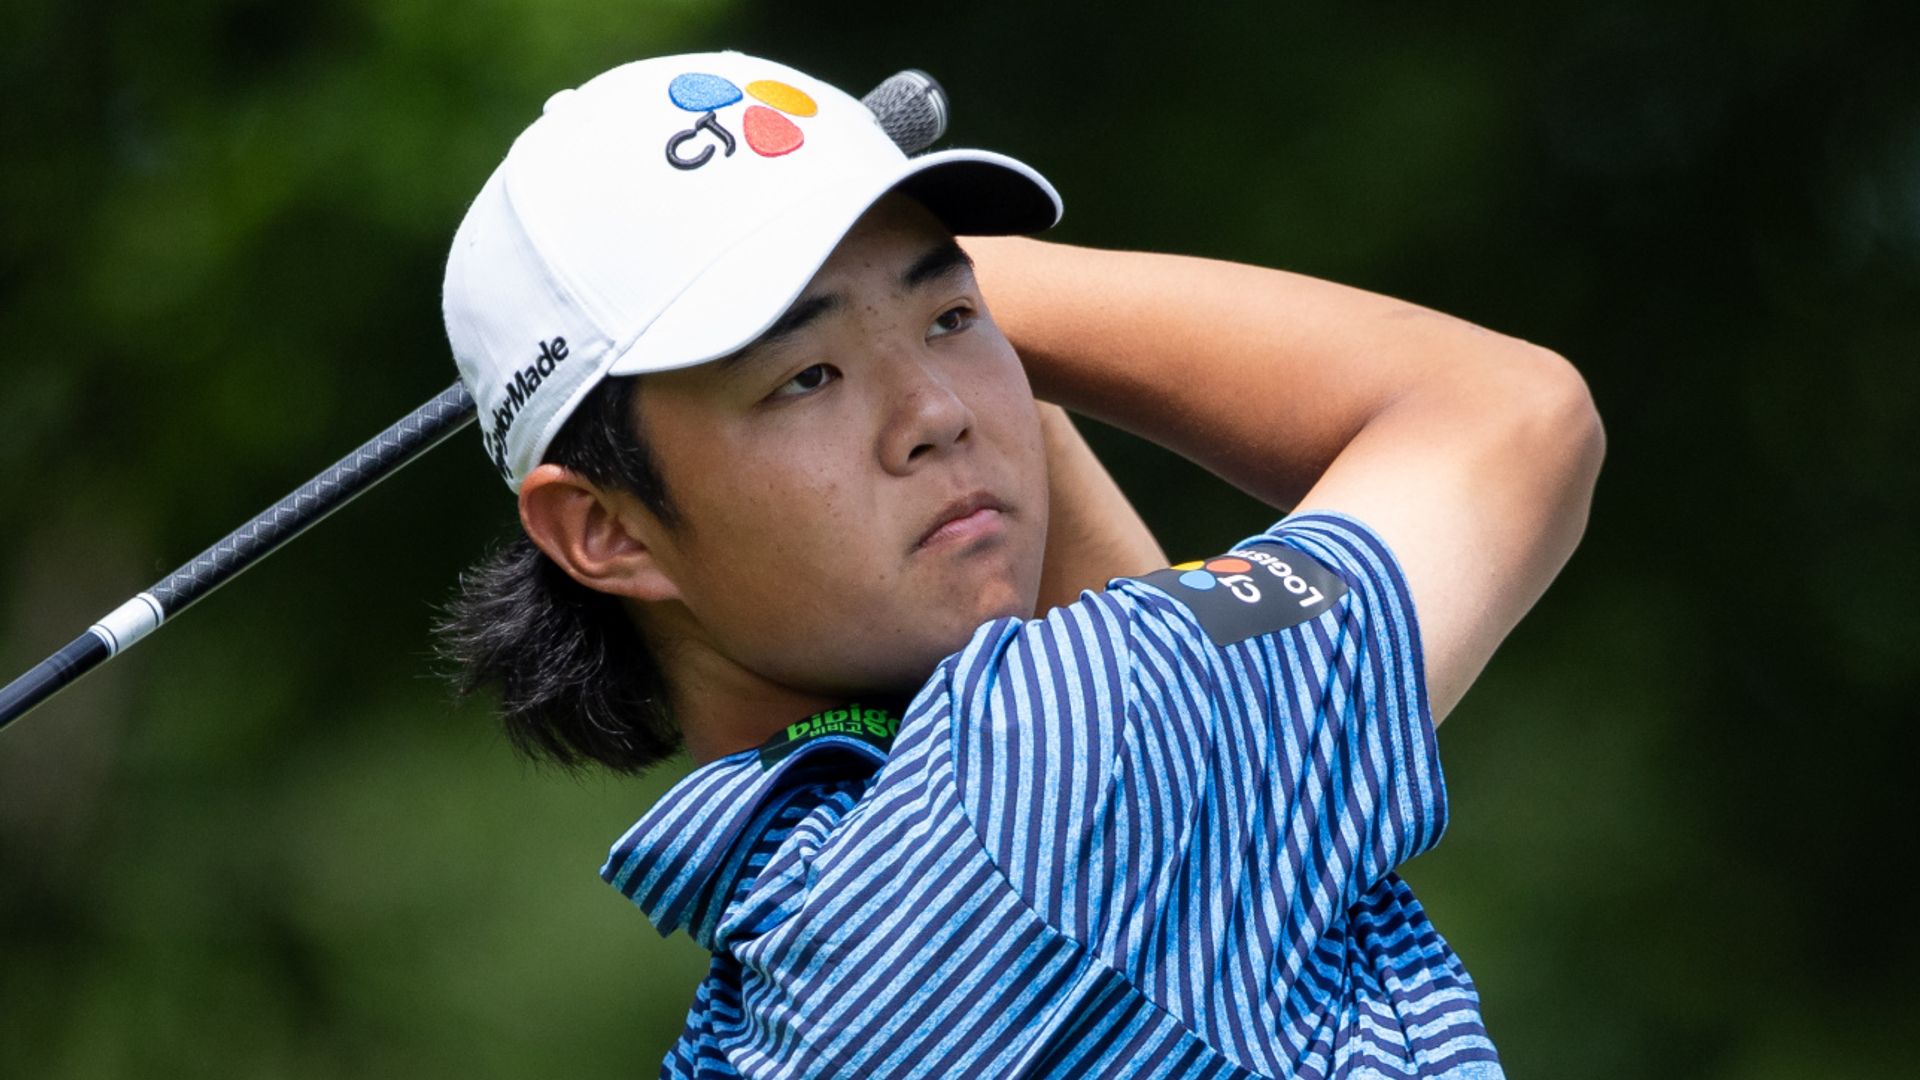 16-year-old amateur Kim makes cut at CJ Cup Byron Nelson as Knapp leads